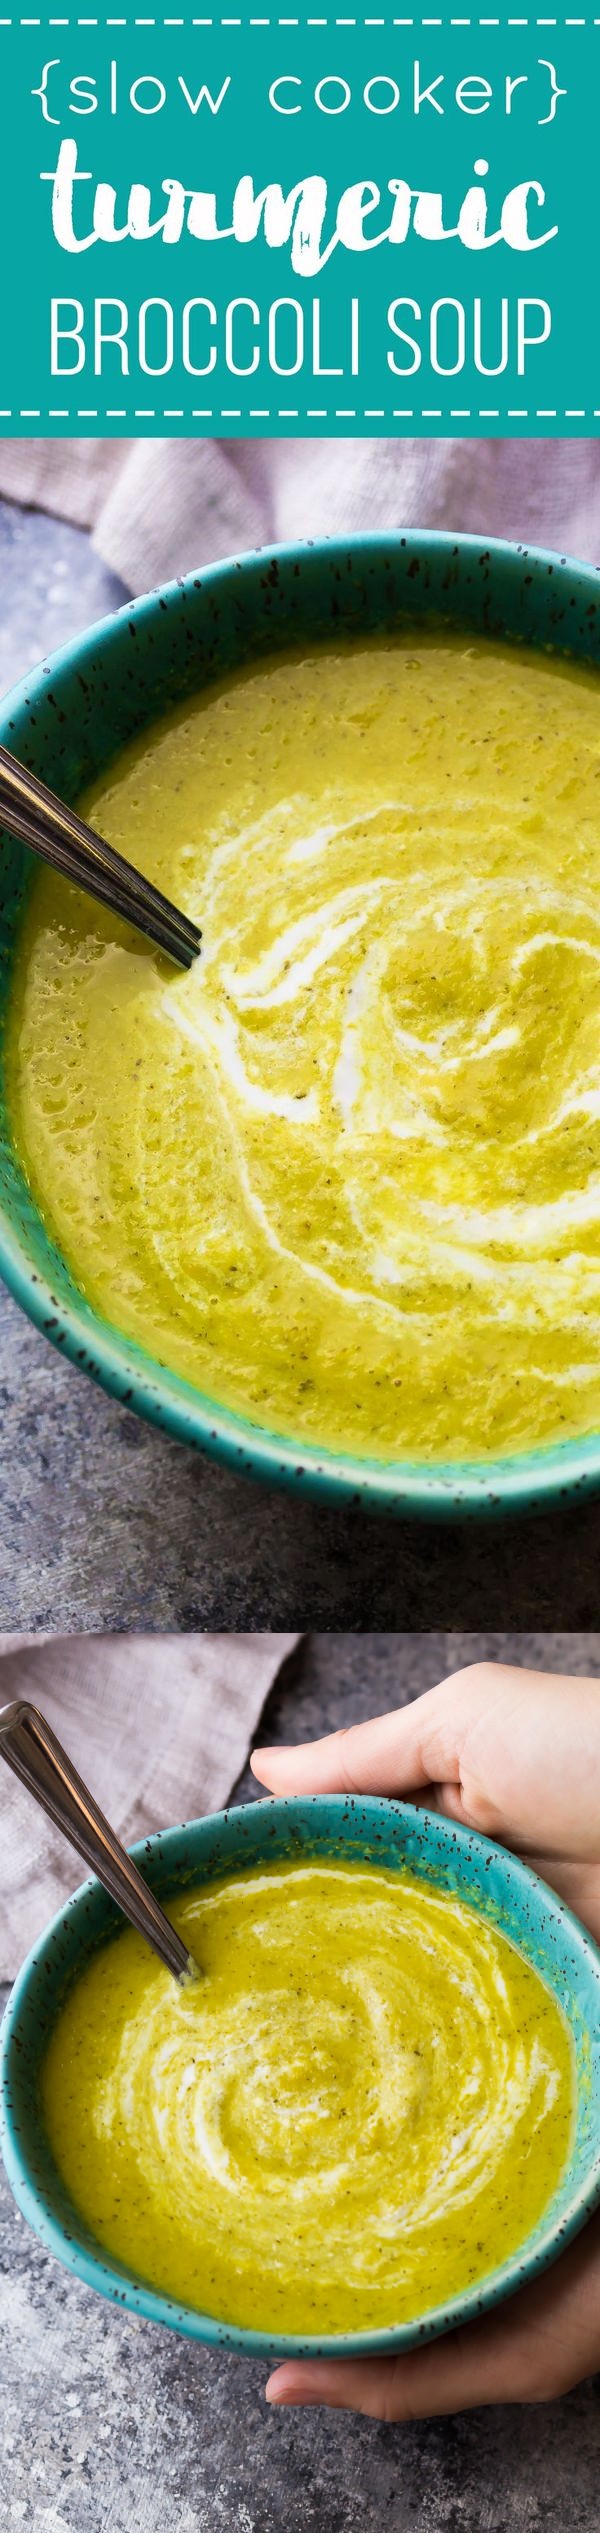 Anti-Inflammatory Broccoli, Ginger and Turmeric Soup (Slow Cooker